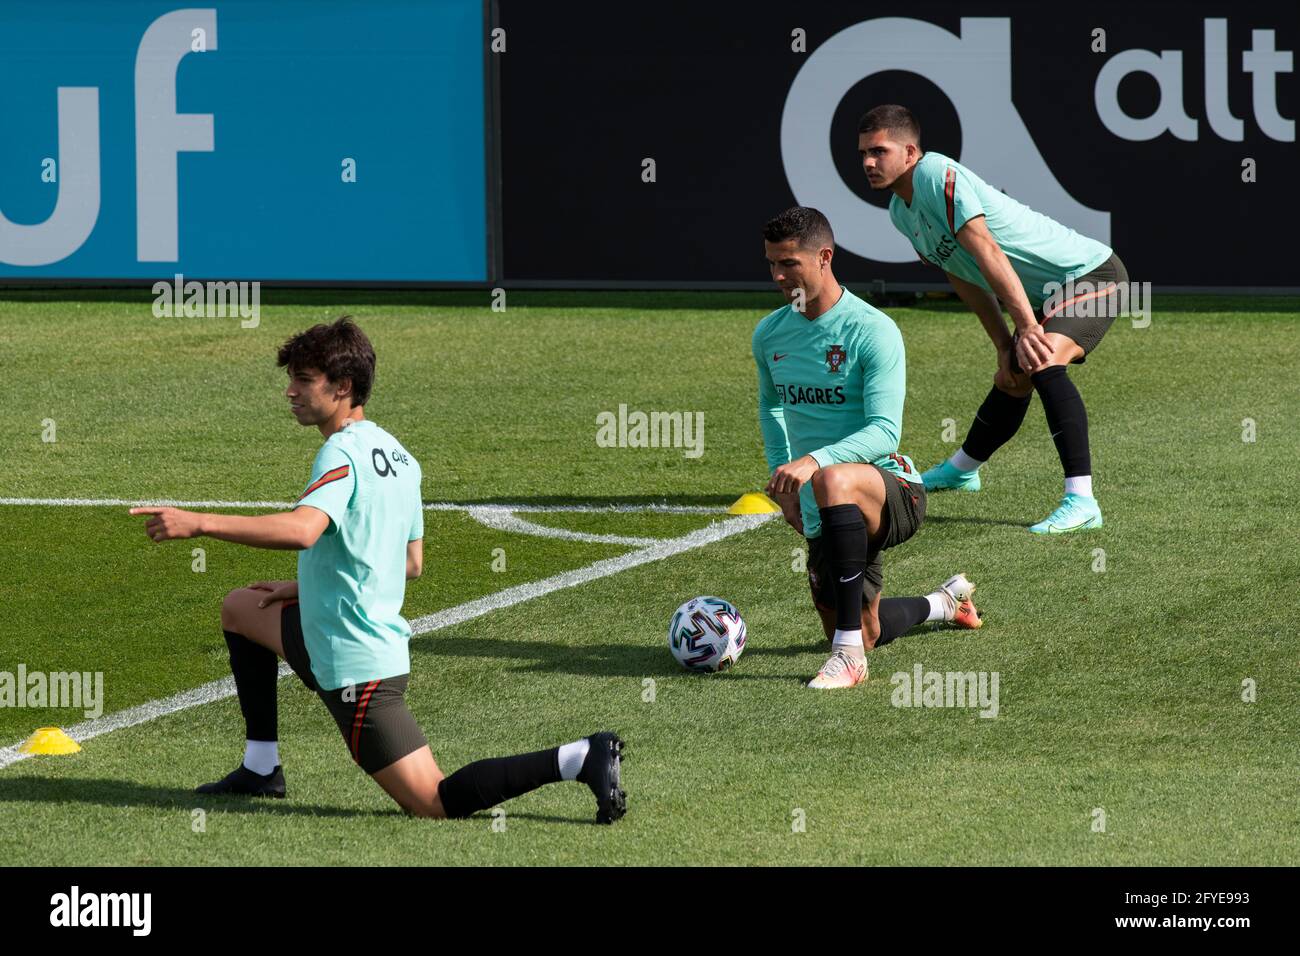 Oeiras, Portugal. 27th May, 2021. Joao Felix (L), Cristiano Ronaldo (C) and Andre Silva (R) are seen in action during the training session at Cidade do Futebol training ground in Oeiras.Portugal football team trains for the first time before competing in the European football championship - EURO 2020 - scheduled to start on June 11th. (Photo by Hugo Amaral/SOPA Images/Sipa USA) Credit: Sipa USA/Alamy Live News Stock Photo